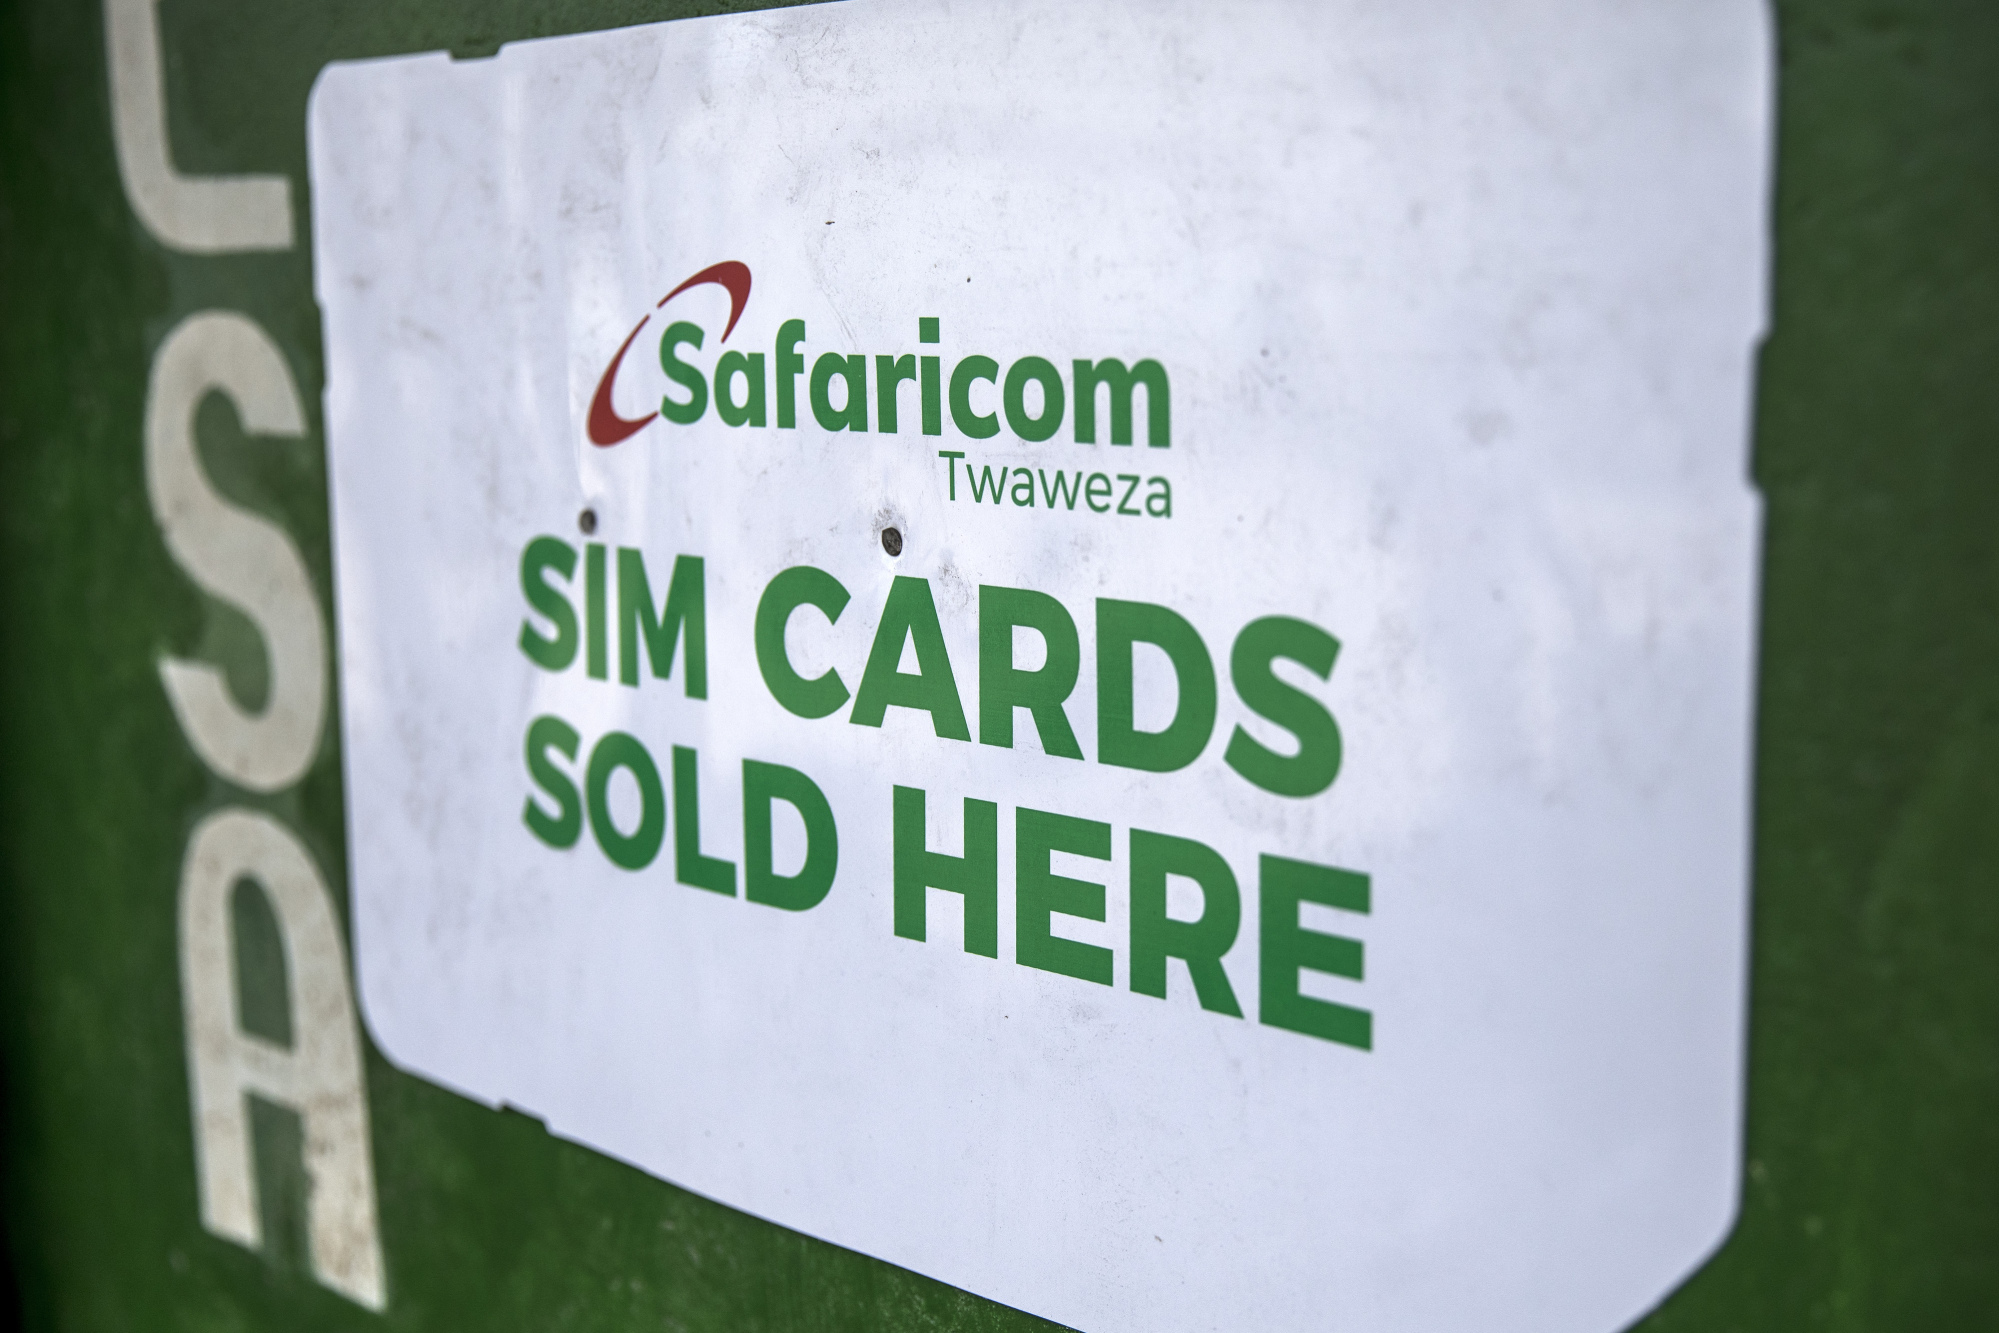 Safaricom seeks to convert into a holding firm that will house mobile-phone towers and its financial services businesses.